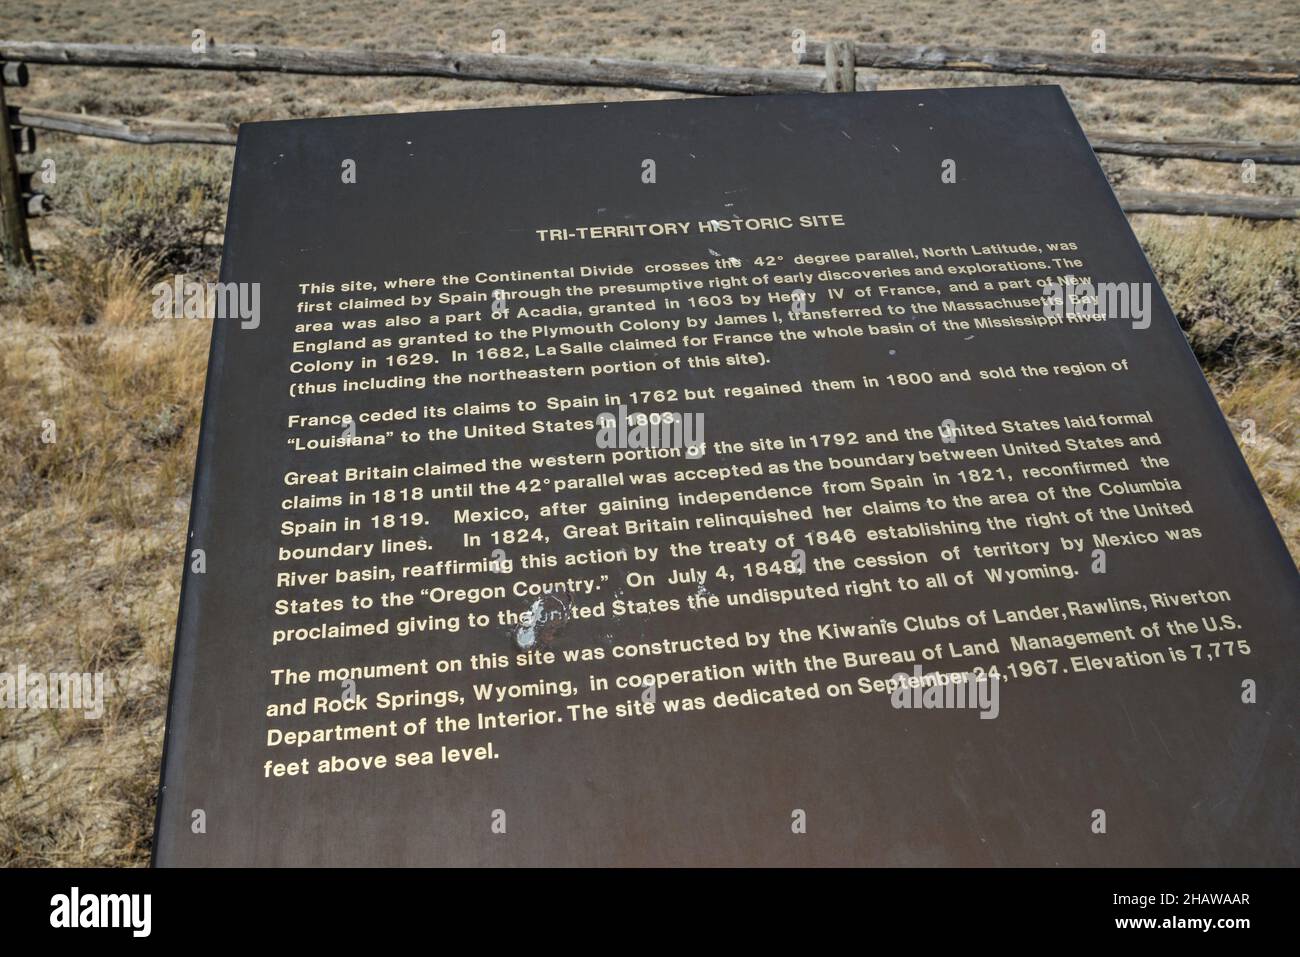 Interpretive sign at Tri-Territory Historic Site, BLM road 4113, Continental Divide, Red Desert, Wyoming, USA Stock Photo